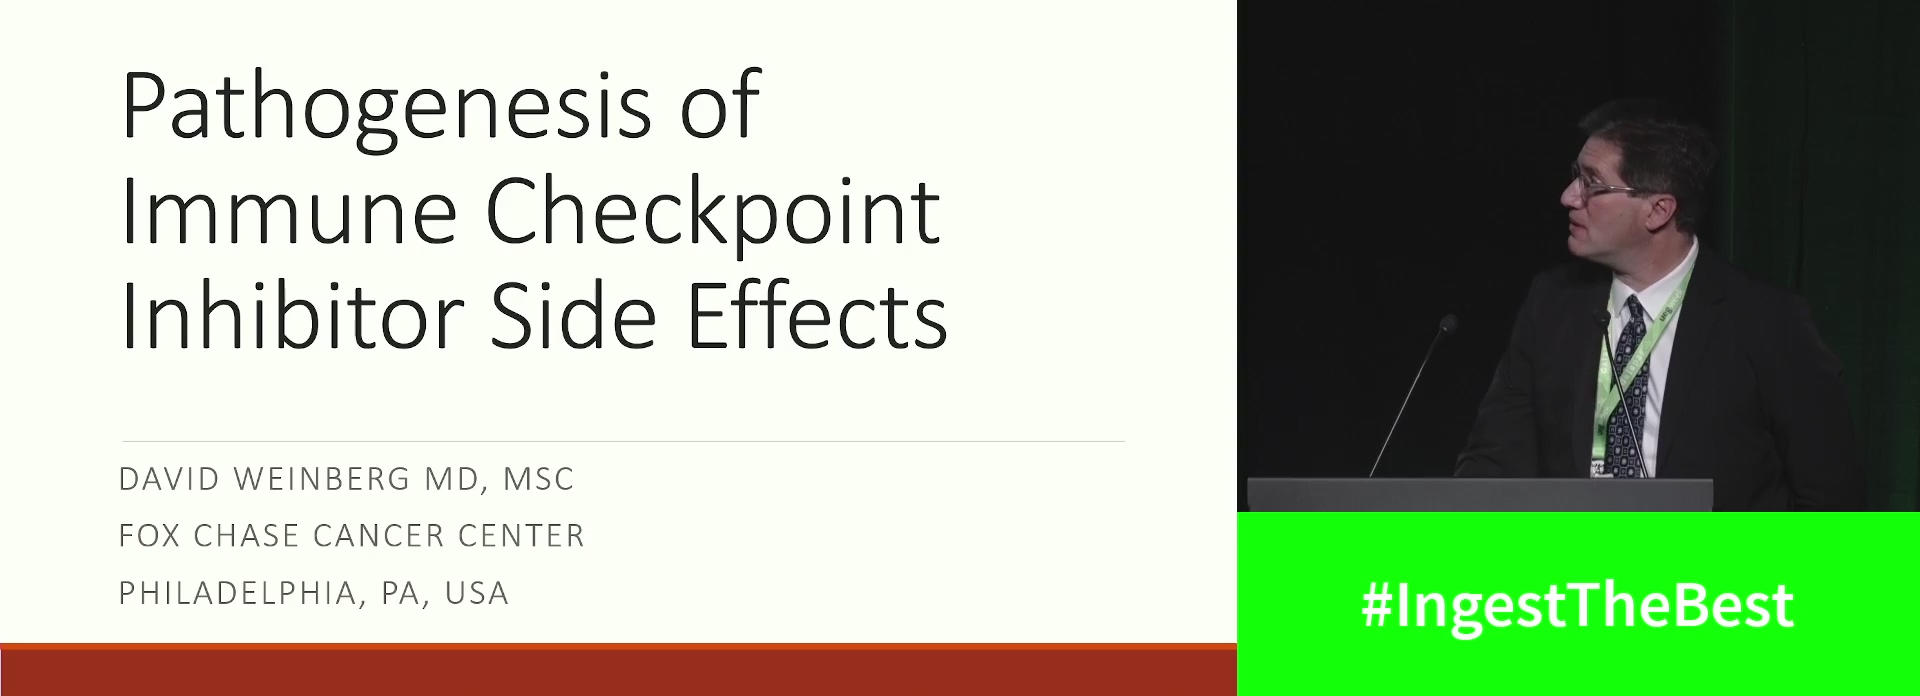 Pathogenesis of immune check point inhiabitor side effects / Complications of check point therapies in daily clinical practice